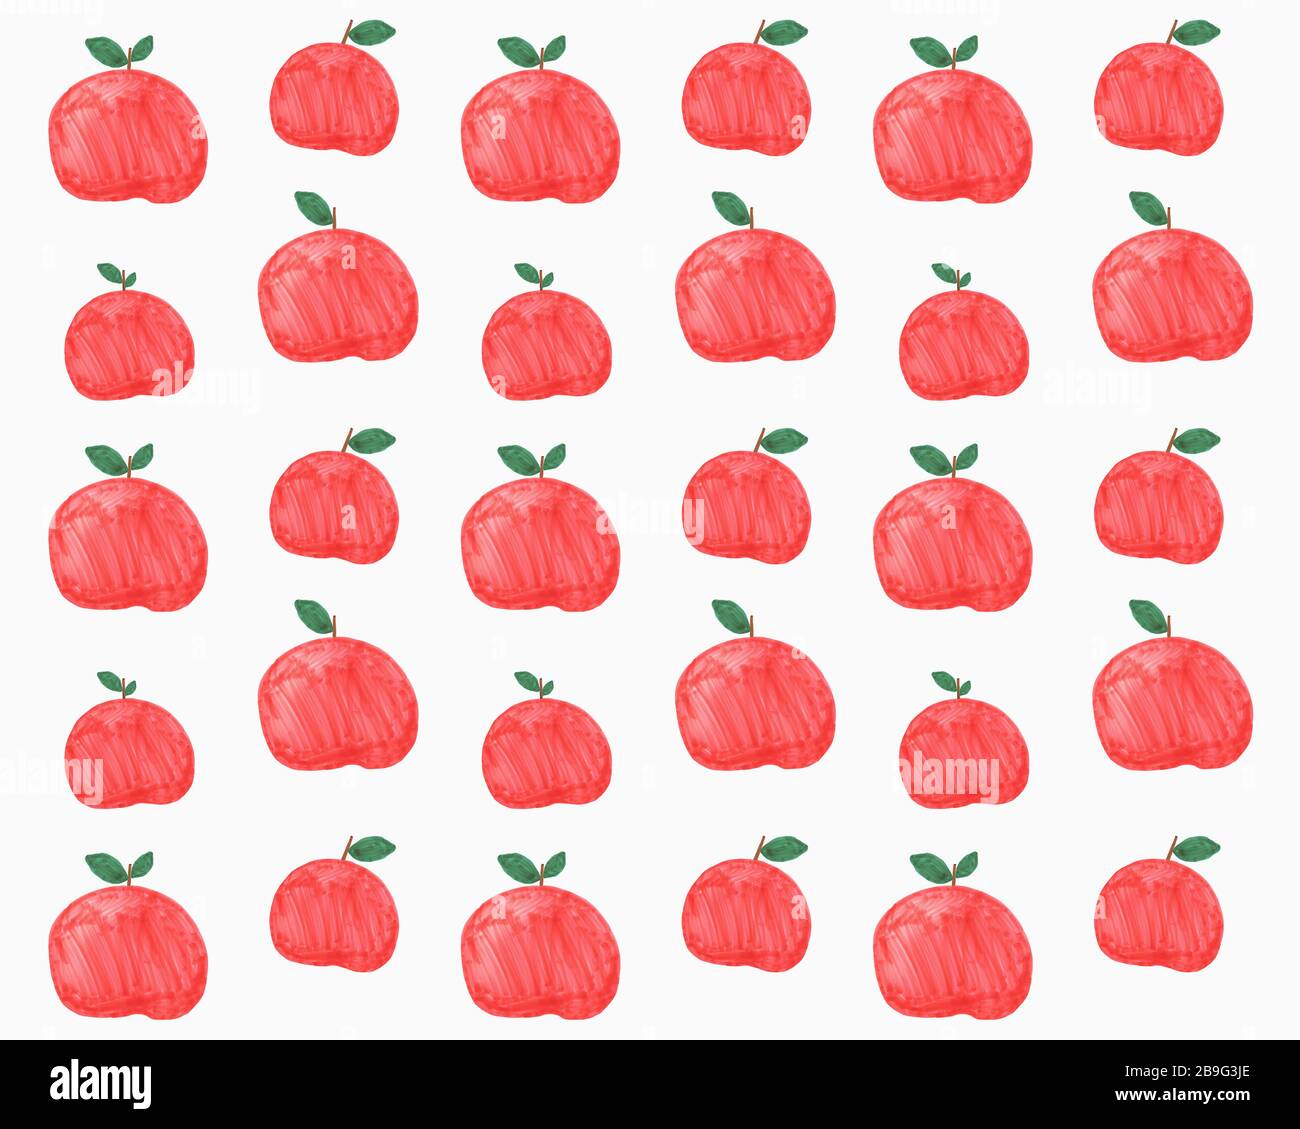 Illustration of red apples on white background Stock Photo